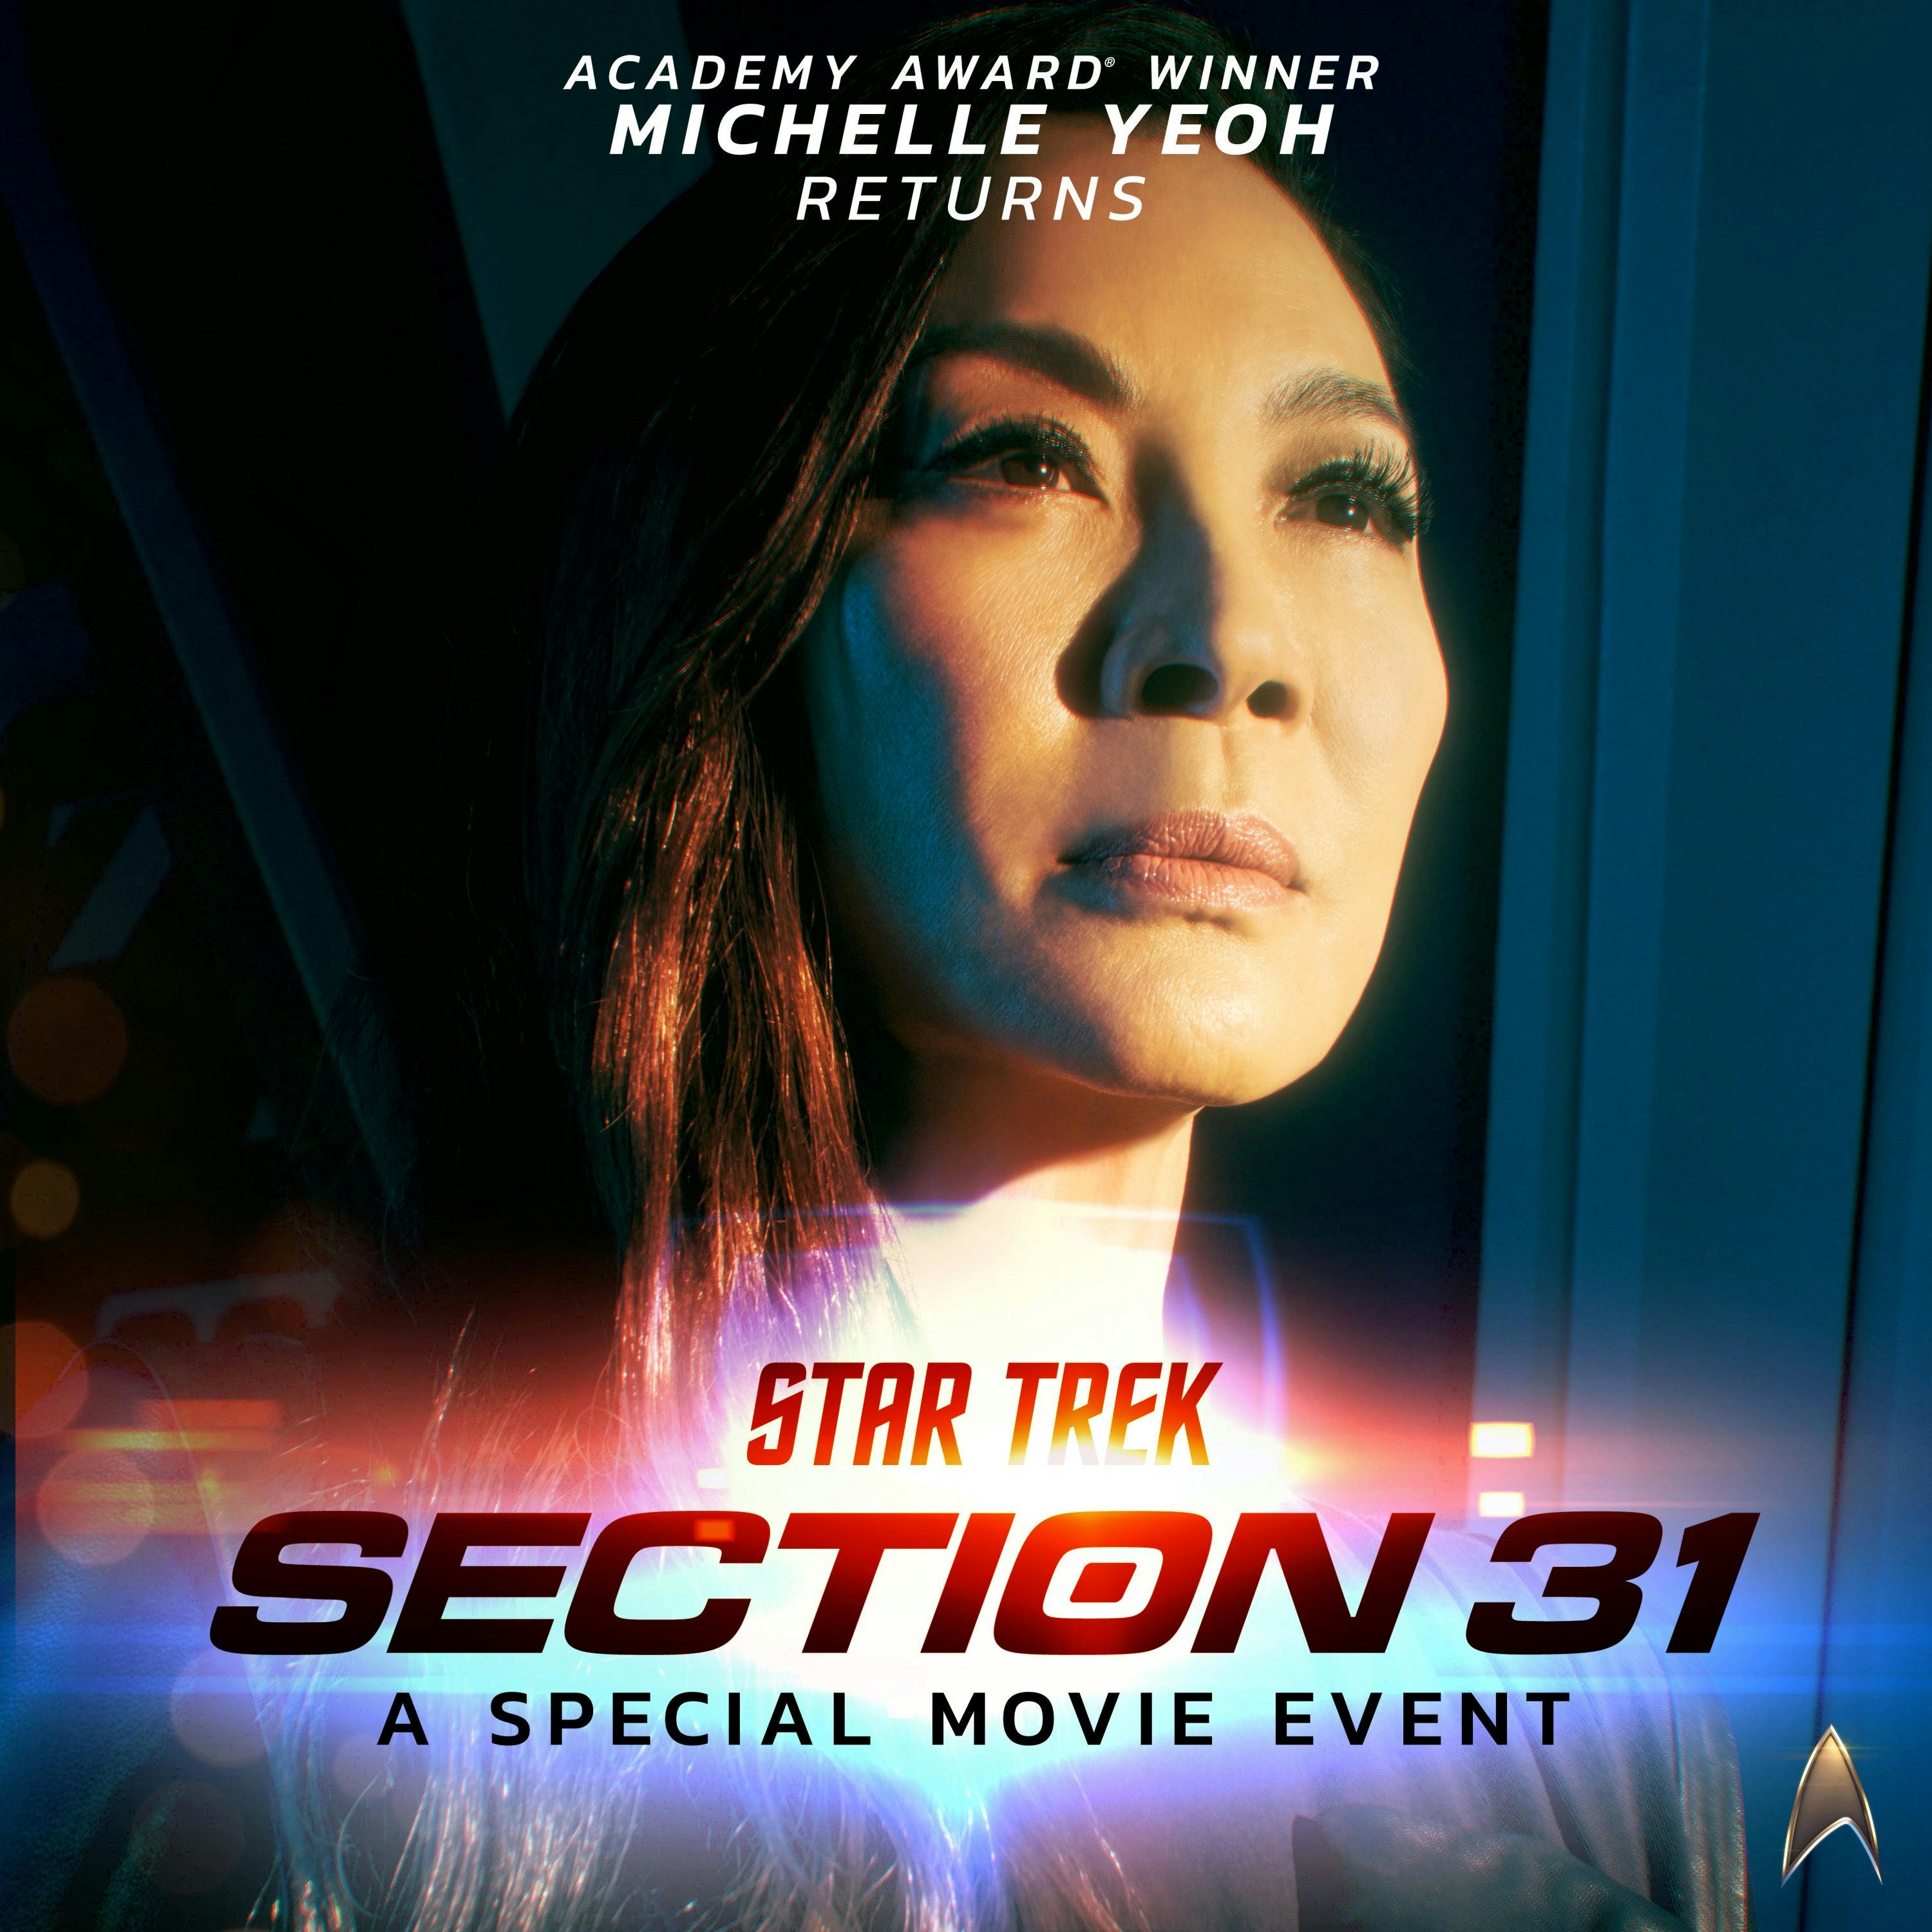 promotional art work featuring Michelle Yeoh as Philippa Georgiou for Star Trek: Section 31